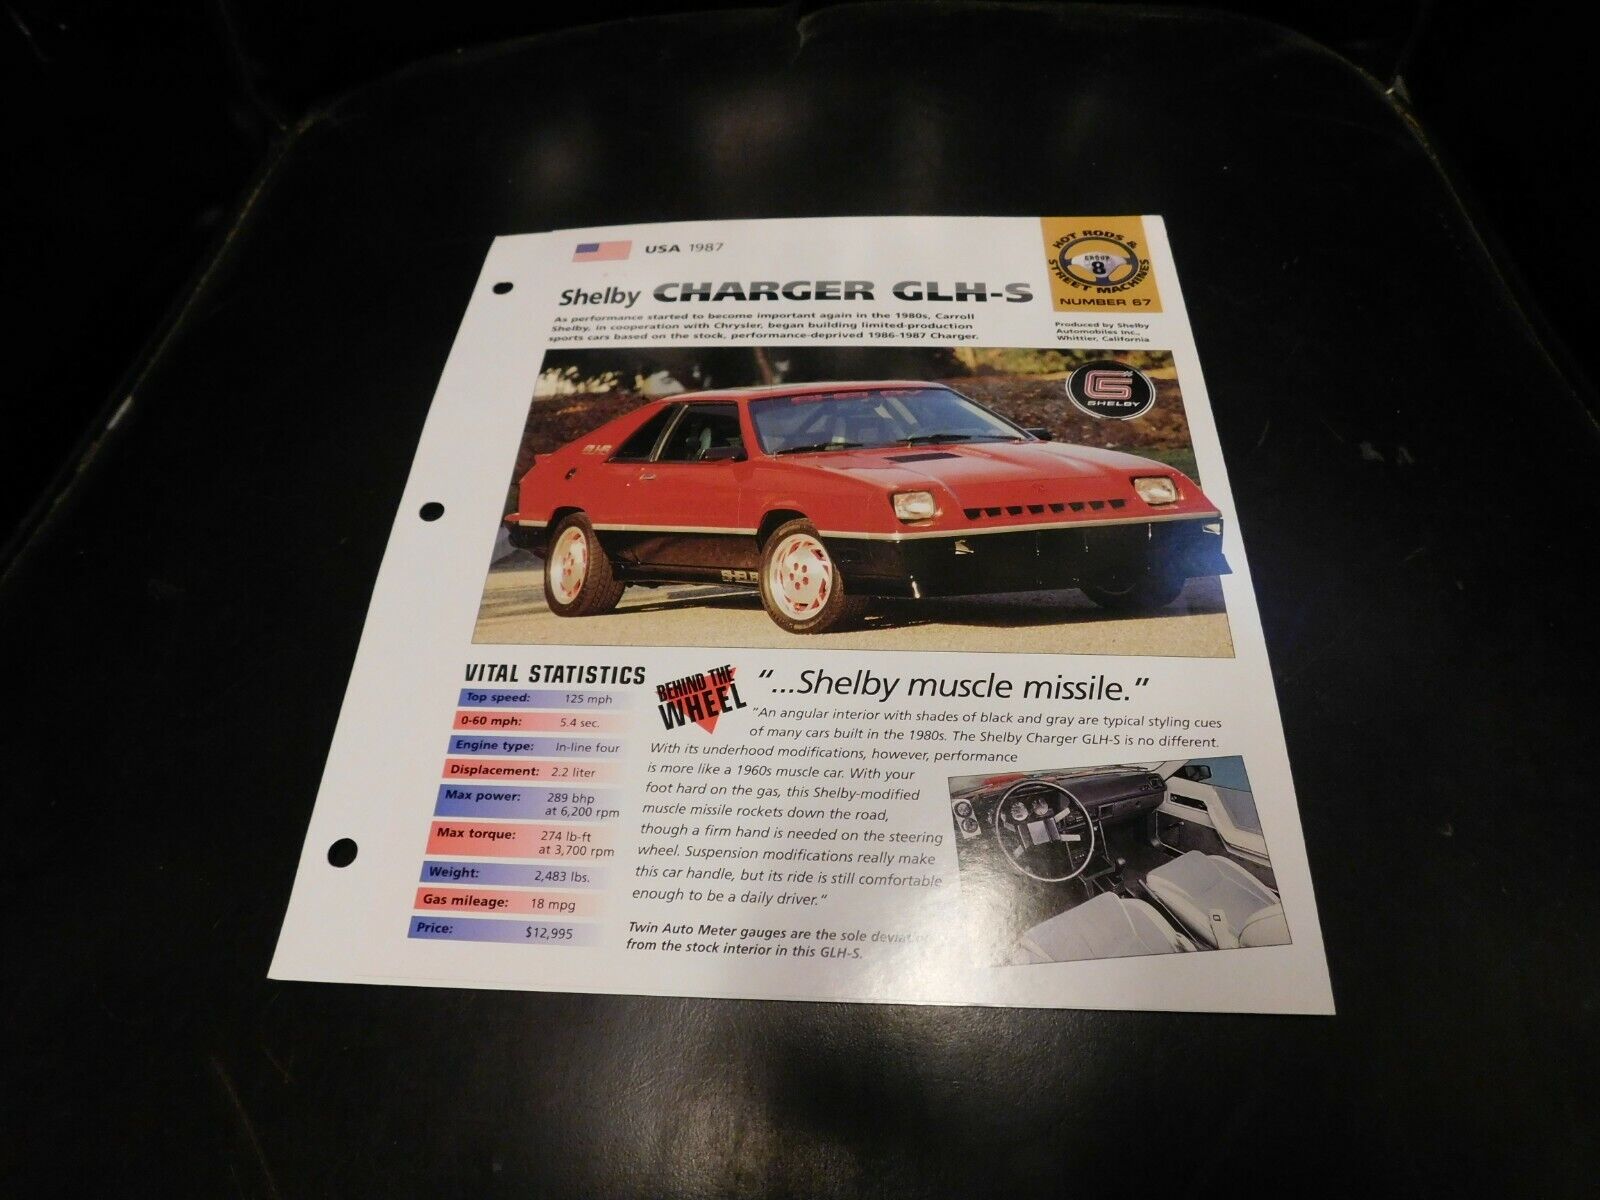 1987 Dodge Shelby Charger GLH-S Spec Sheet Brochure Photo Poster 